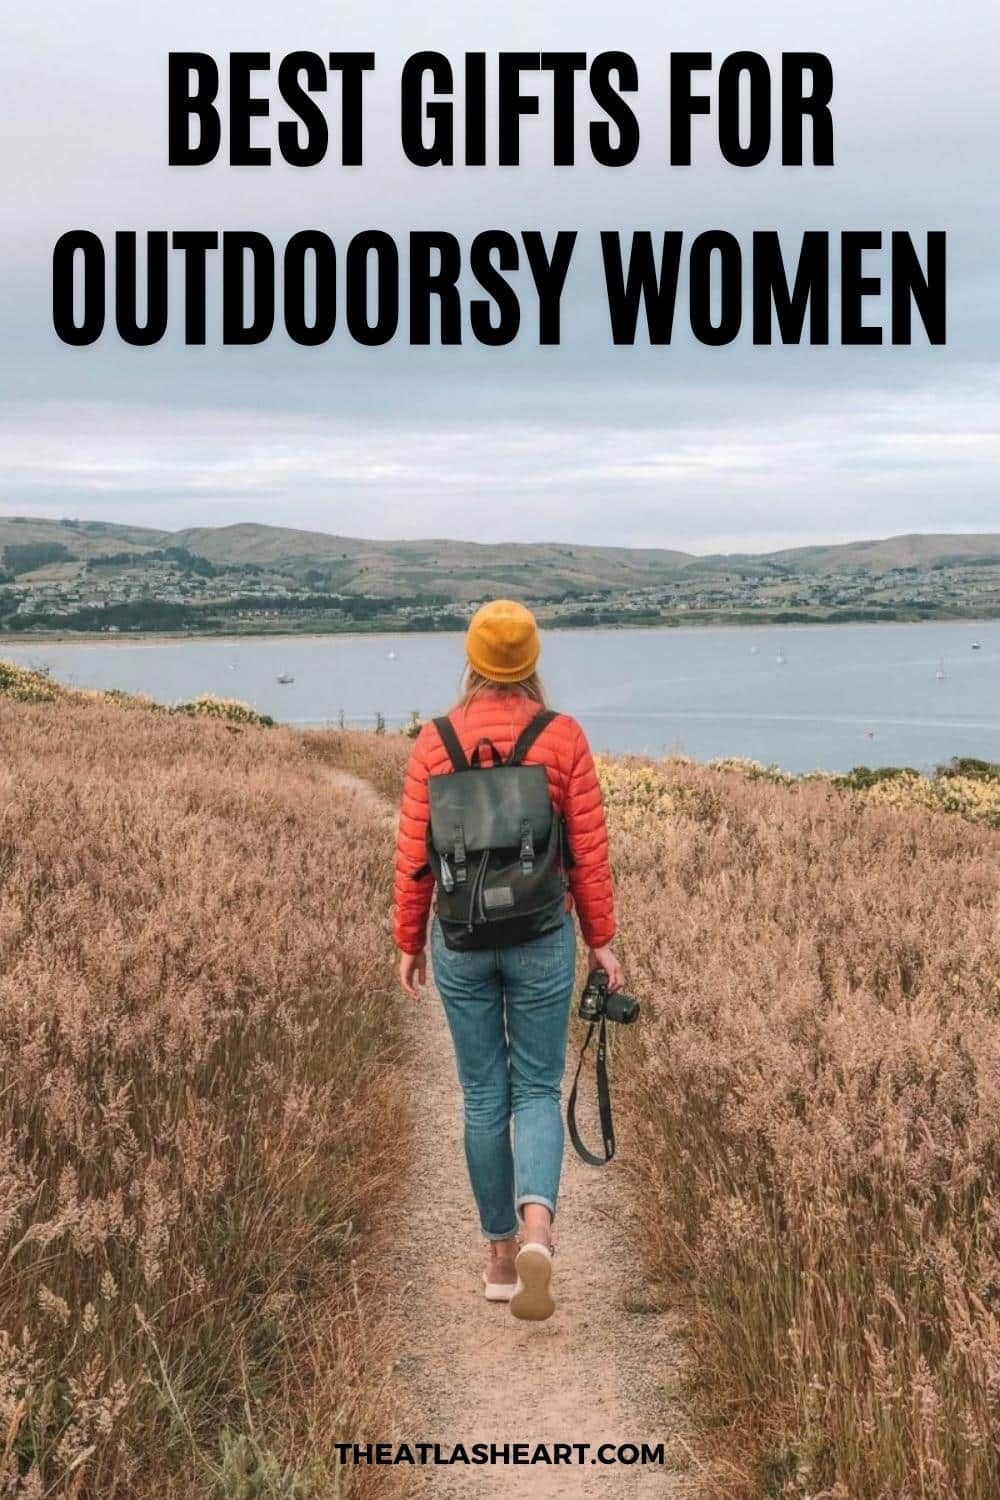 Gifts for Outdoorsy Women Pin